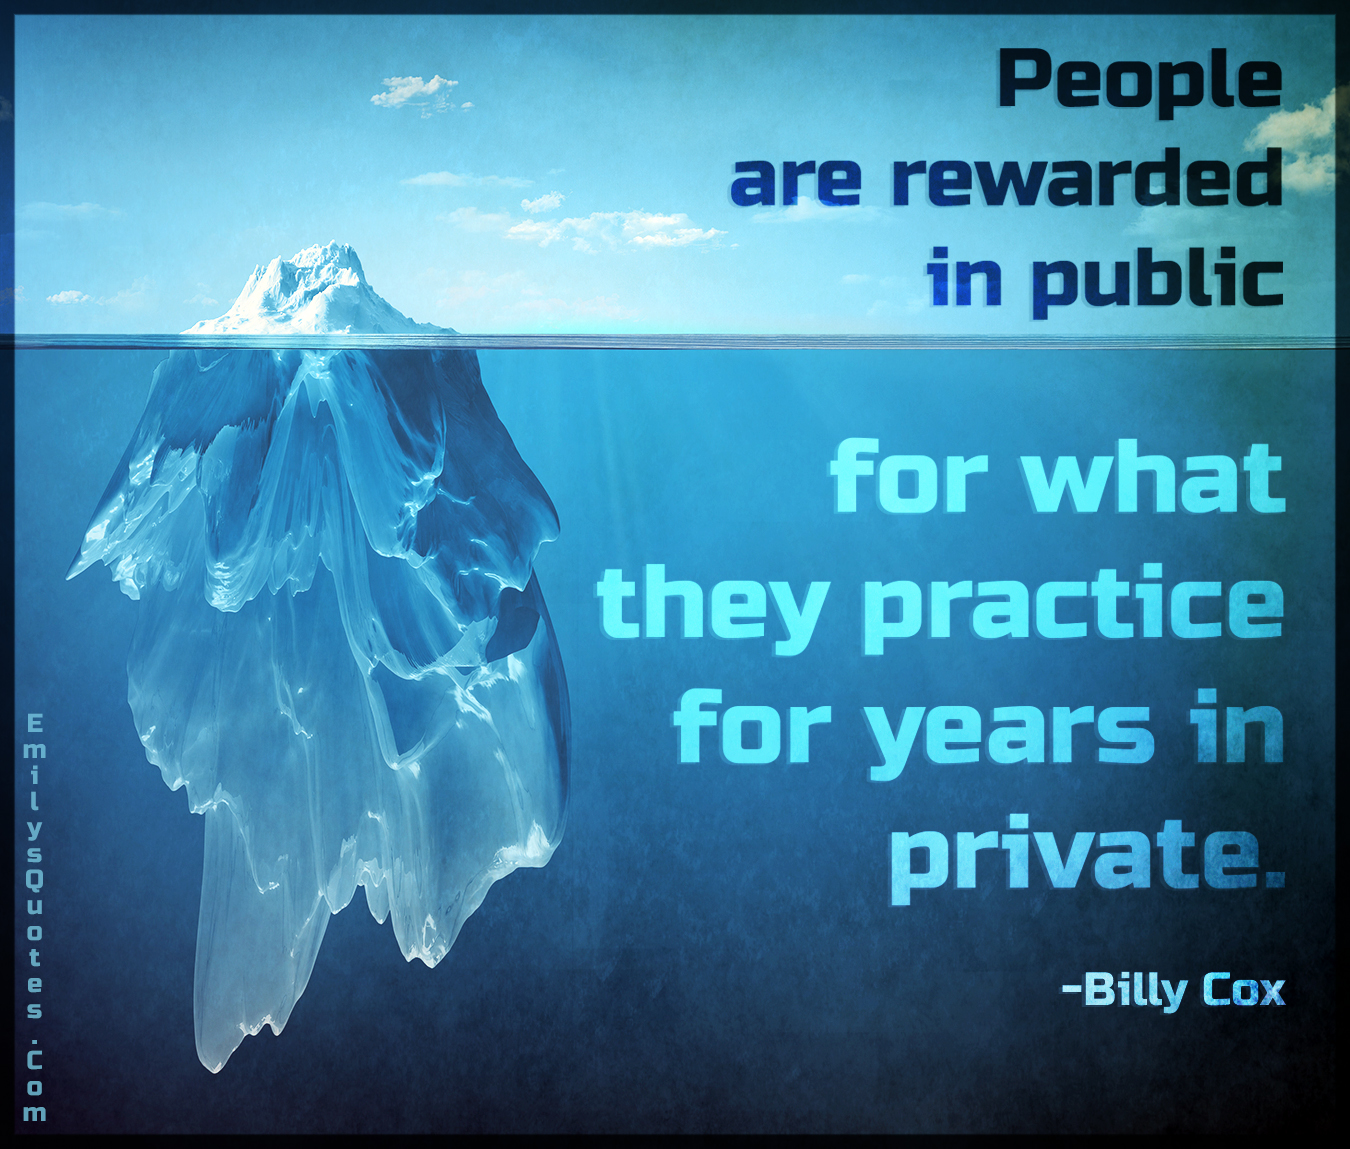 People are rewarded in public for what they practice for years in private